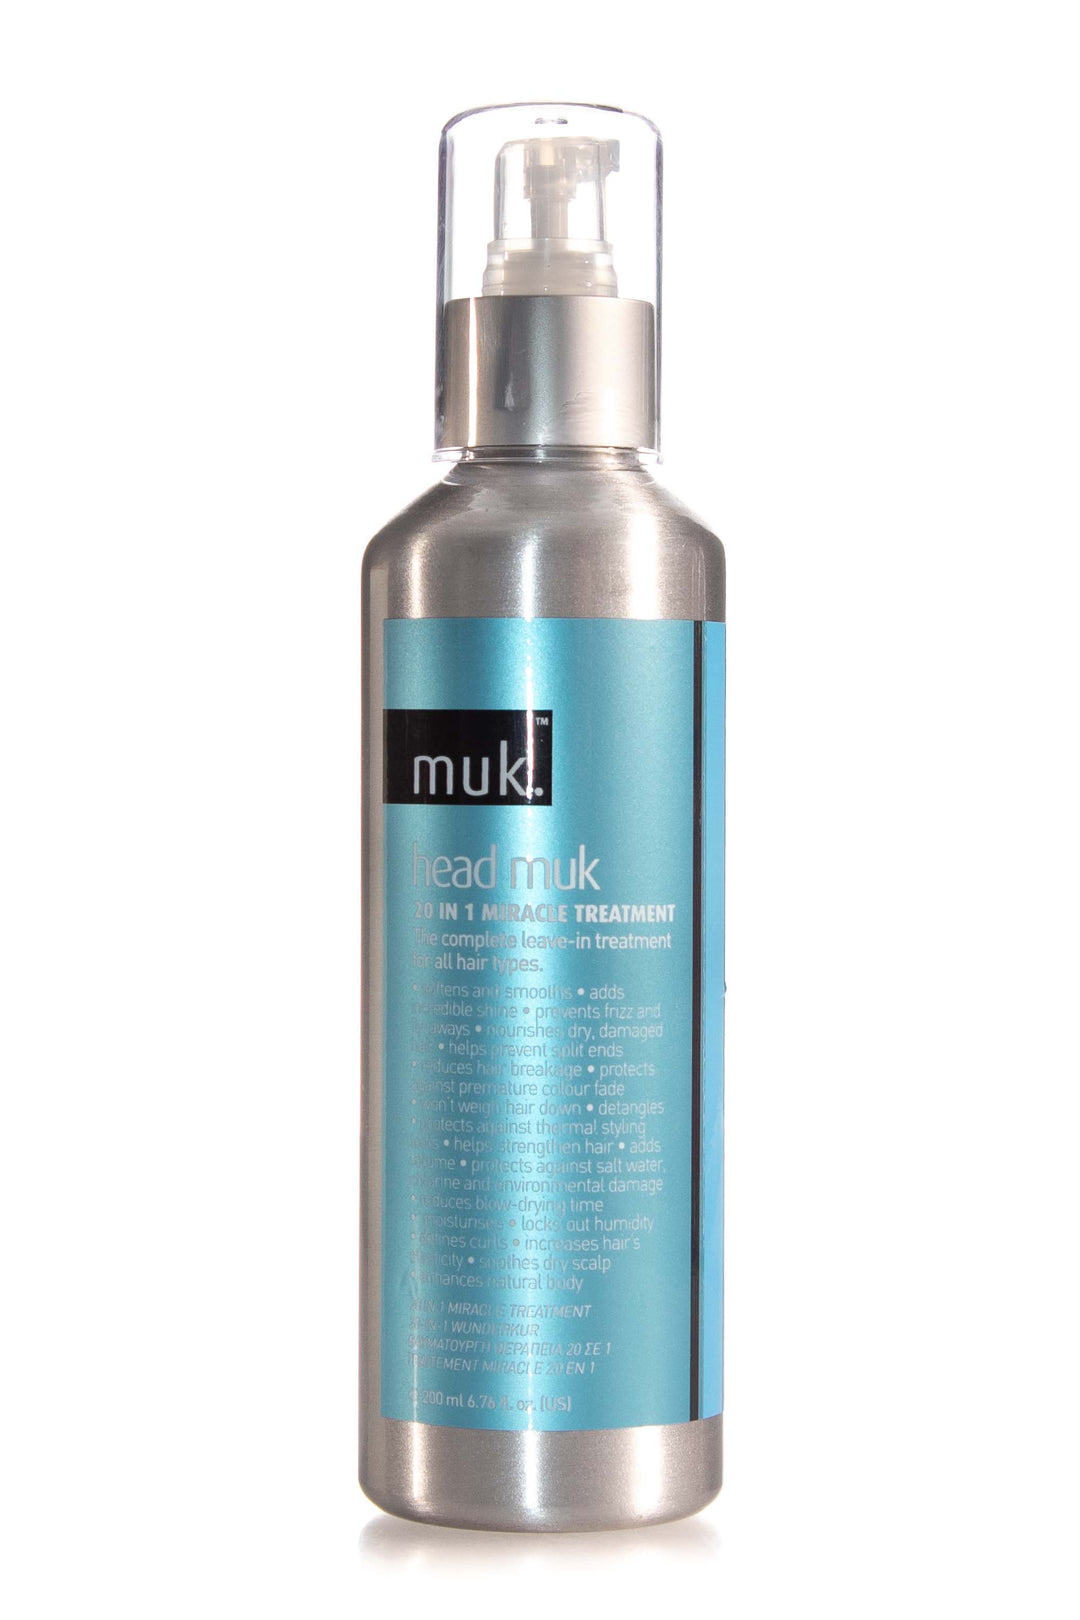 muk-head-muk-20-in-1-miracle-treatment-200ml